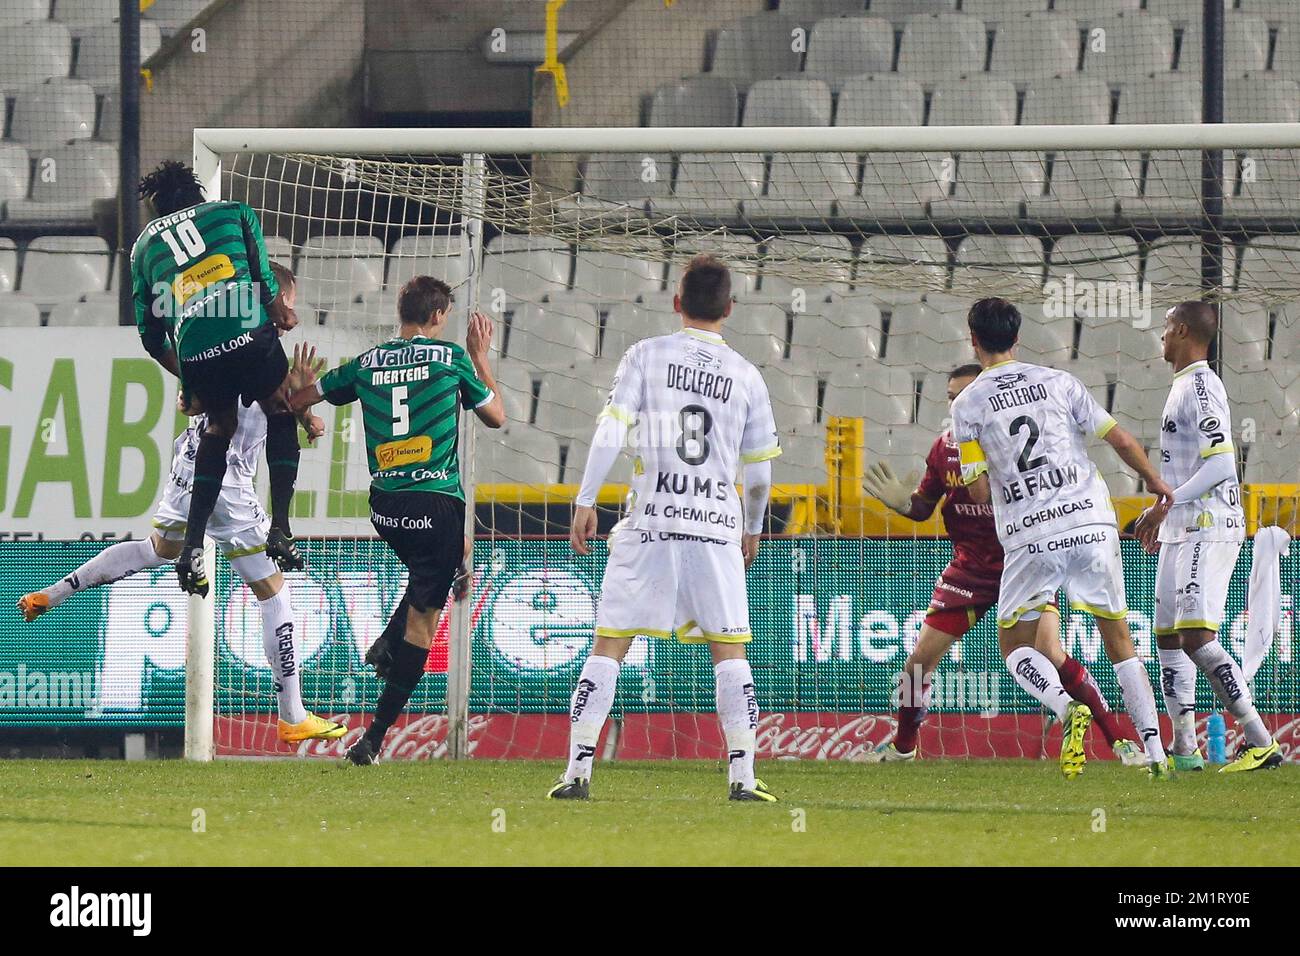 20131019 - BRUGGE, BELGIUM: Cercle's Michael Uchebo scores a goal during the Jupiler Pro League match between Cercle Brugge and Zulte Waregem, in Brugge, Saturday 19 October 2013, on day 11 of the Belgian soccer championship. BELGA PHOTO BRUNO FAHY Stock Photo